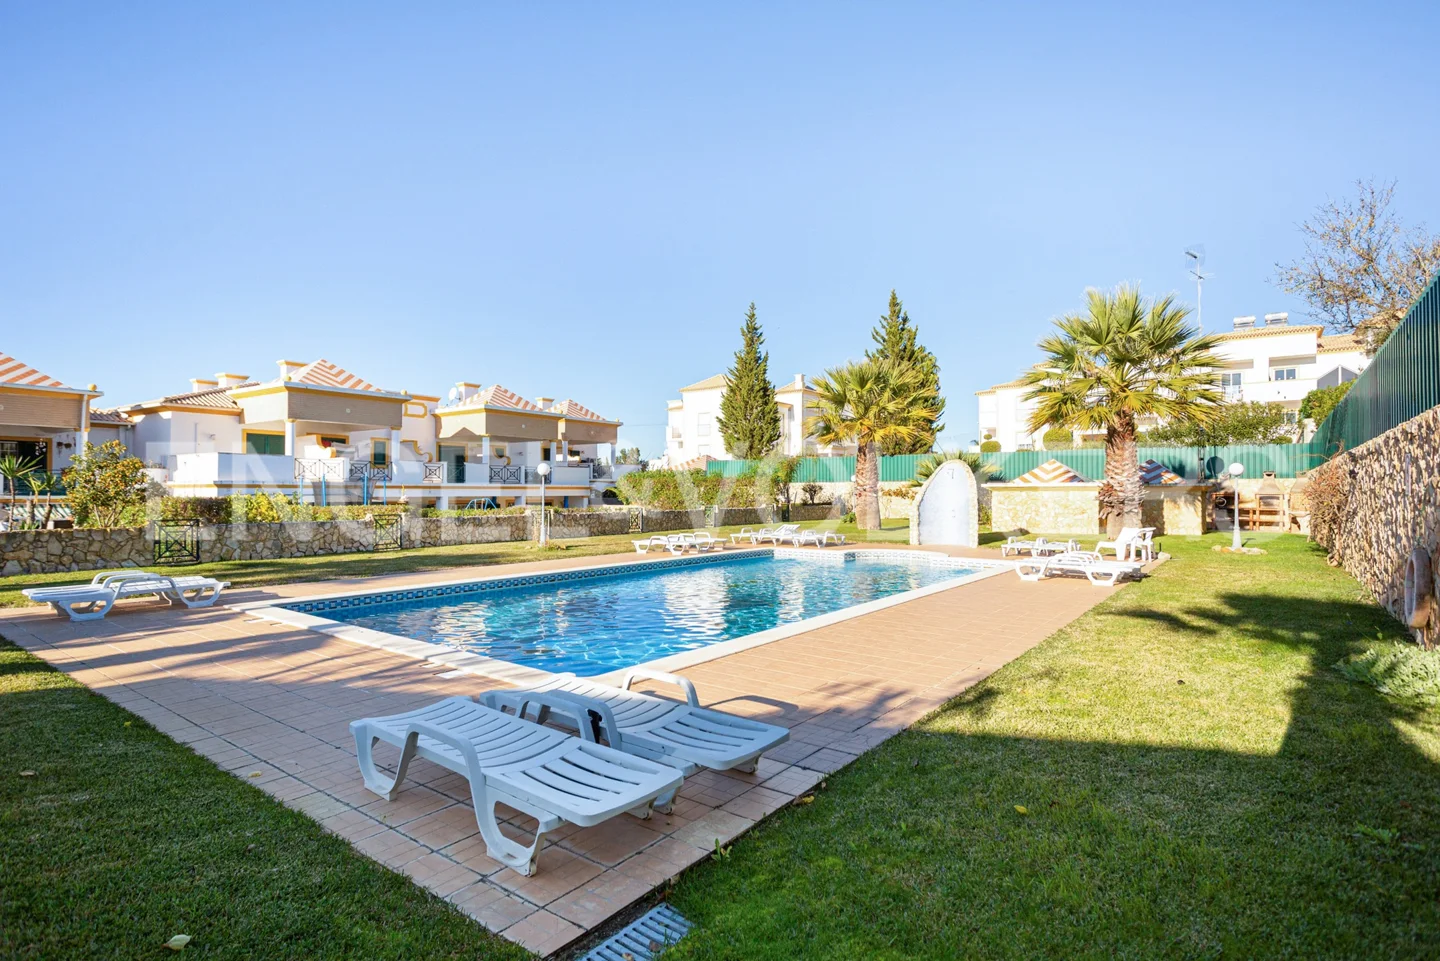 Townhouse in condominium with swimming pool in Albufeira